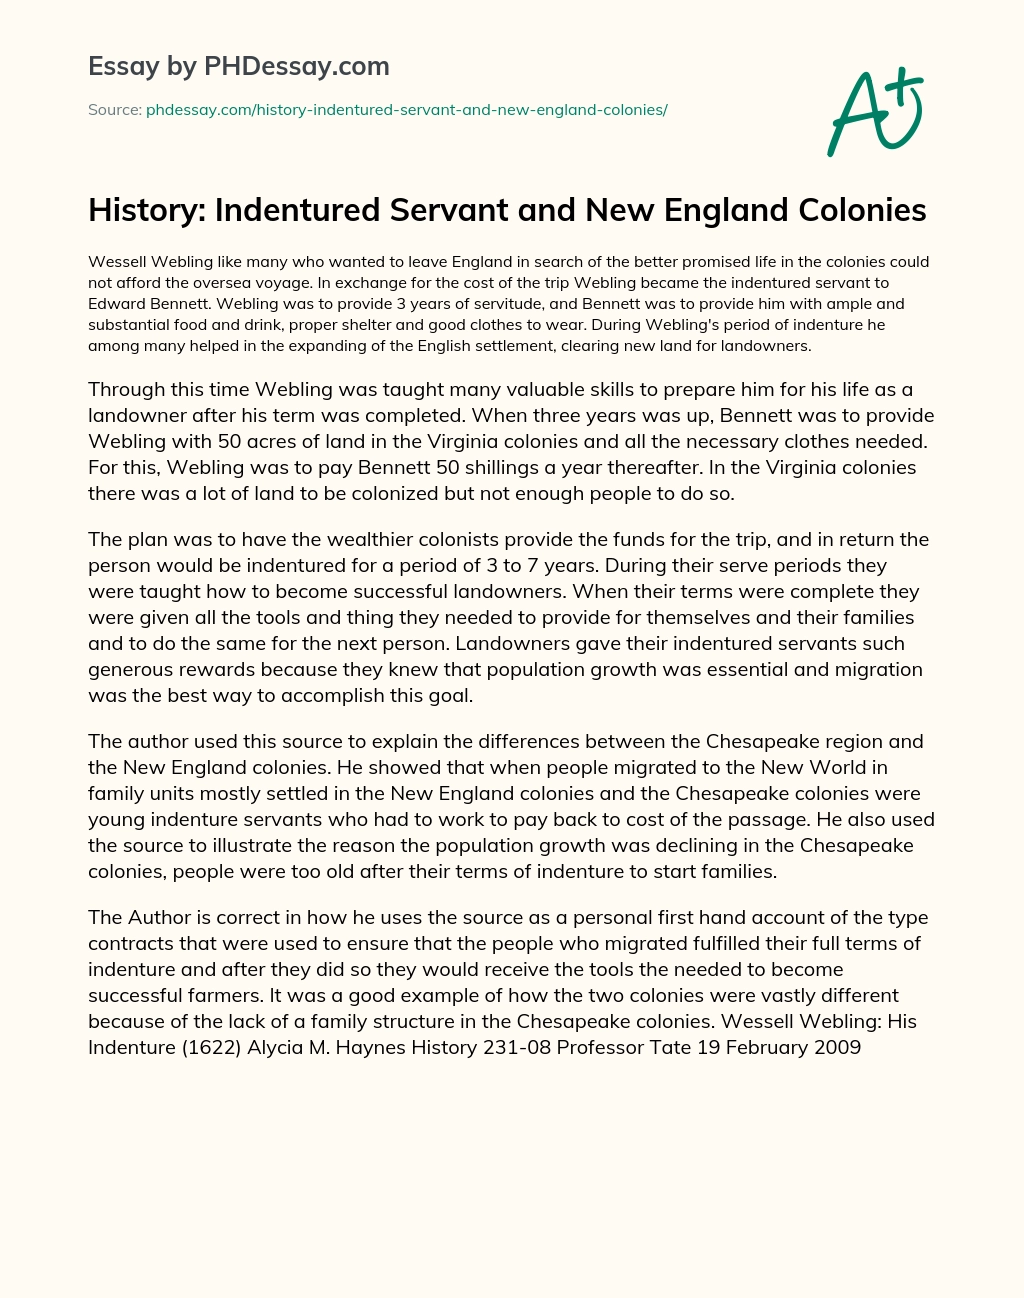 History: Indentured Servant and New England Colonies essay